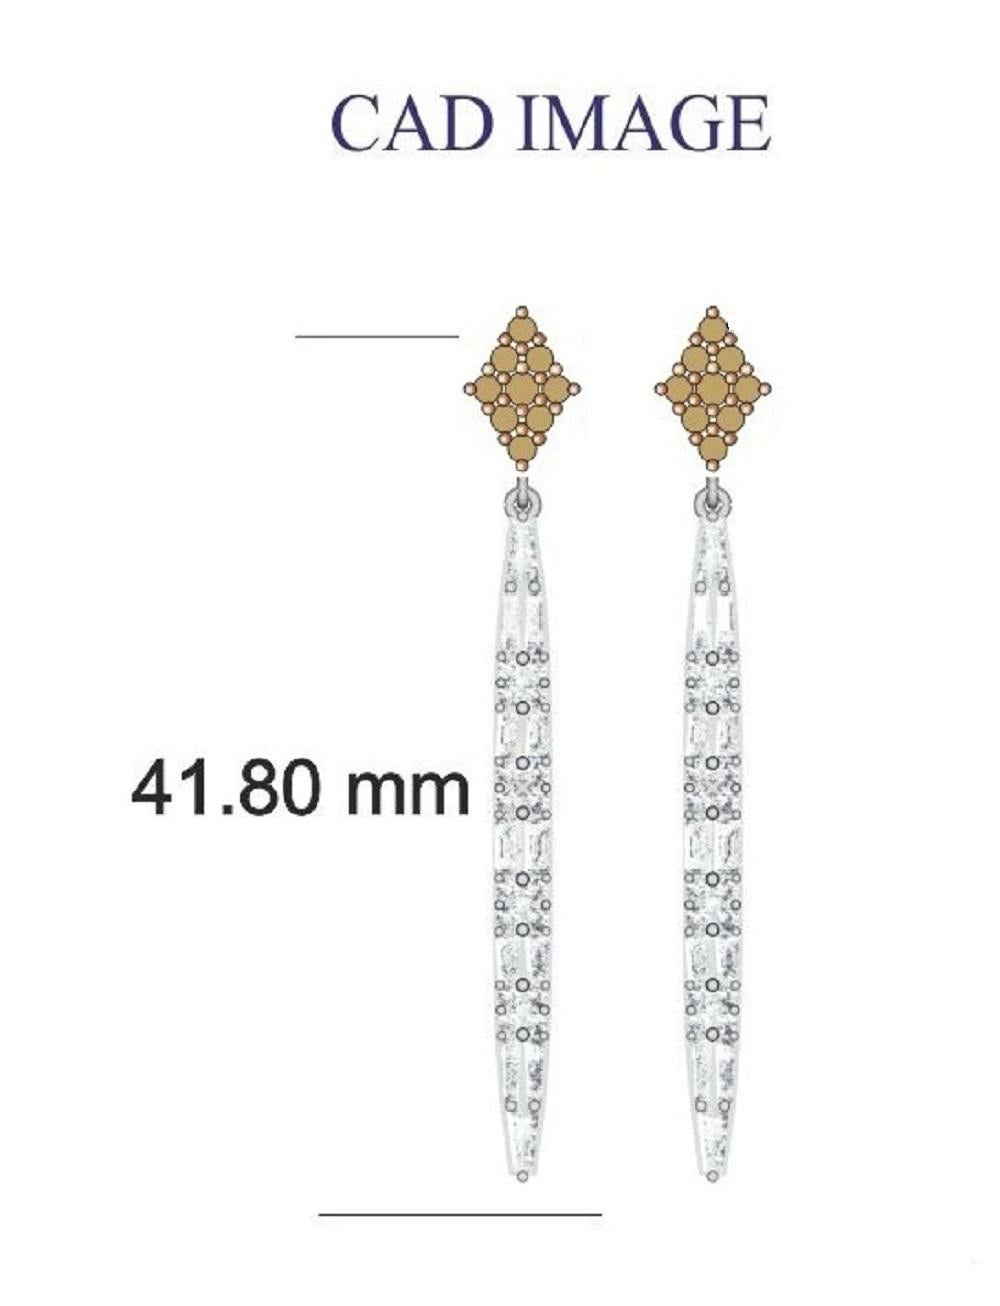 These exquisite design diamond drop dangle earrings offer beauty equaled only to her own.These earrings feature 58 round and 24 baguette-cut diamond set in pressure, channel and prong setting and fashioned in 14 Karat White Gold. These timeless